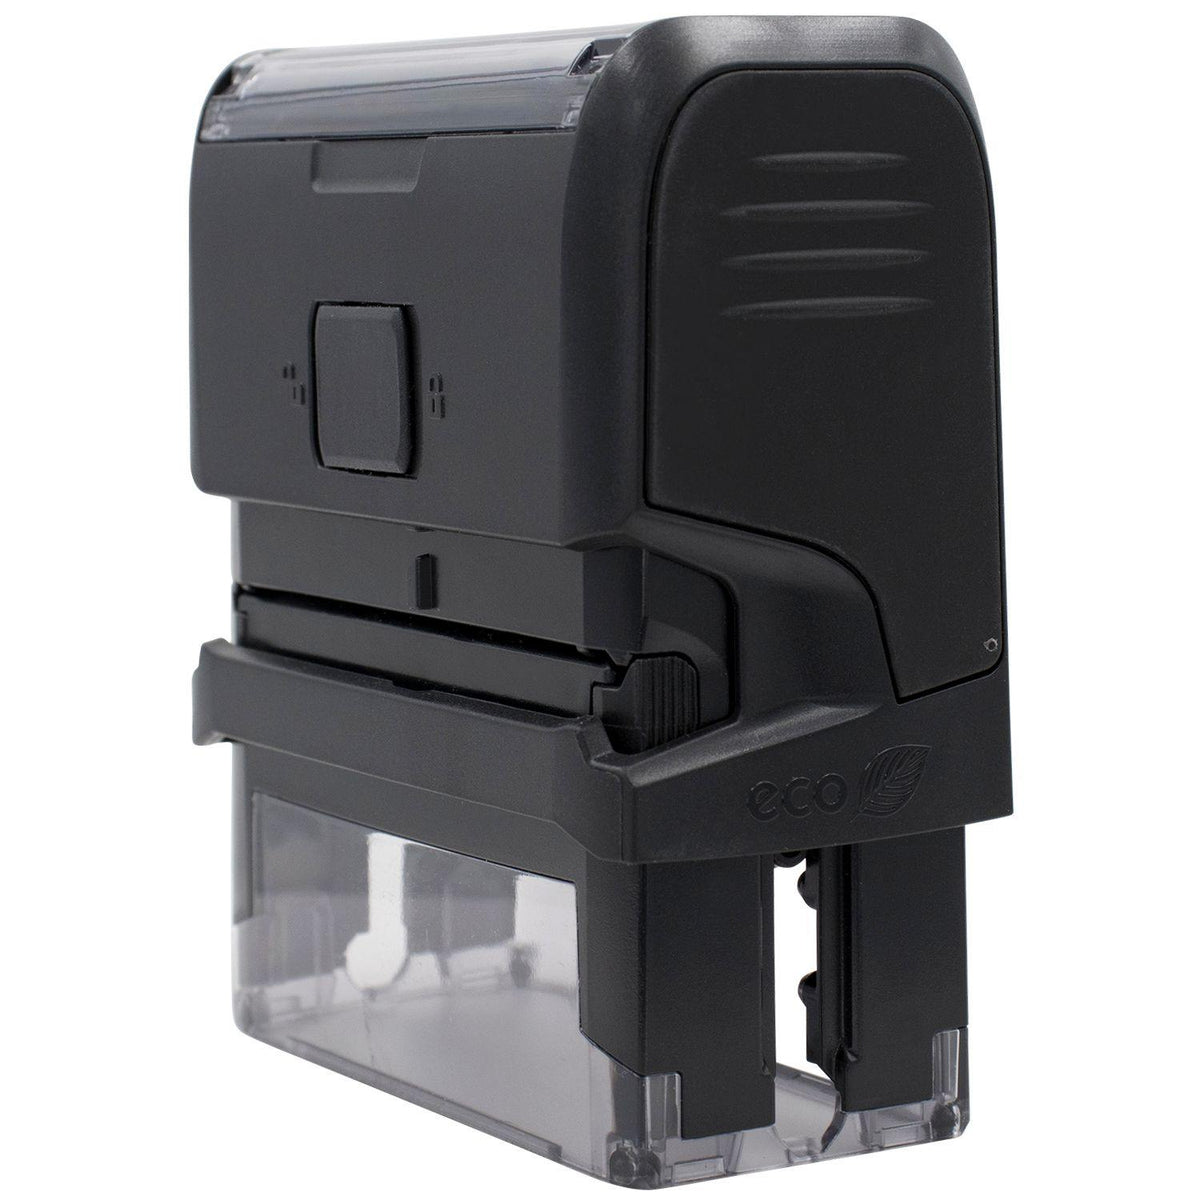 Self Inking Service Copy Stamp - Engineer Seal Stamps - Brand_Trodat, Impression Size_Small, Stamp Type_Self-Inking Stamp, Type of Use_Office